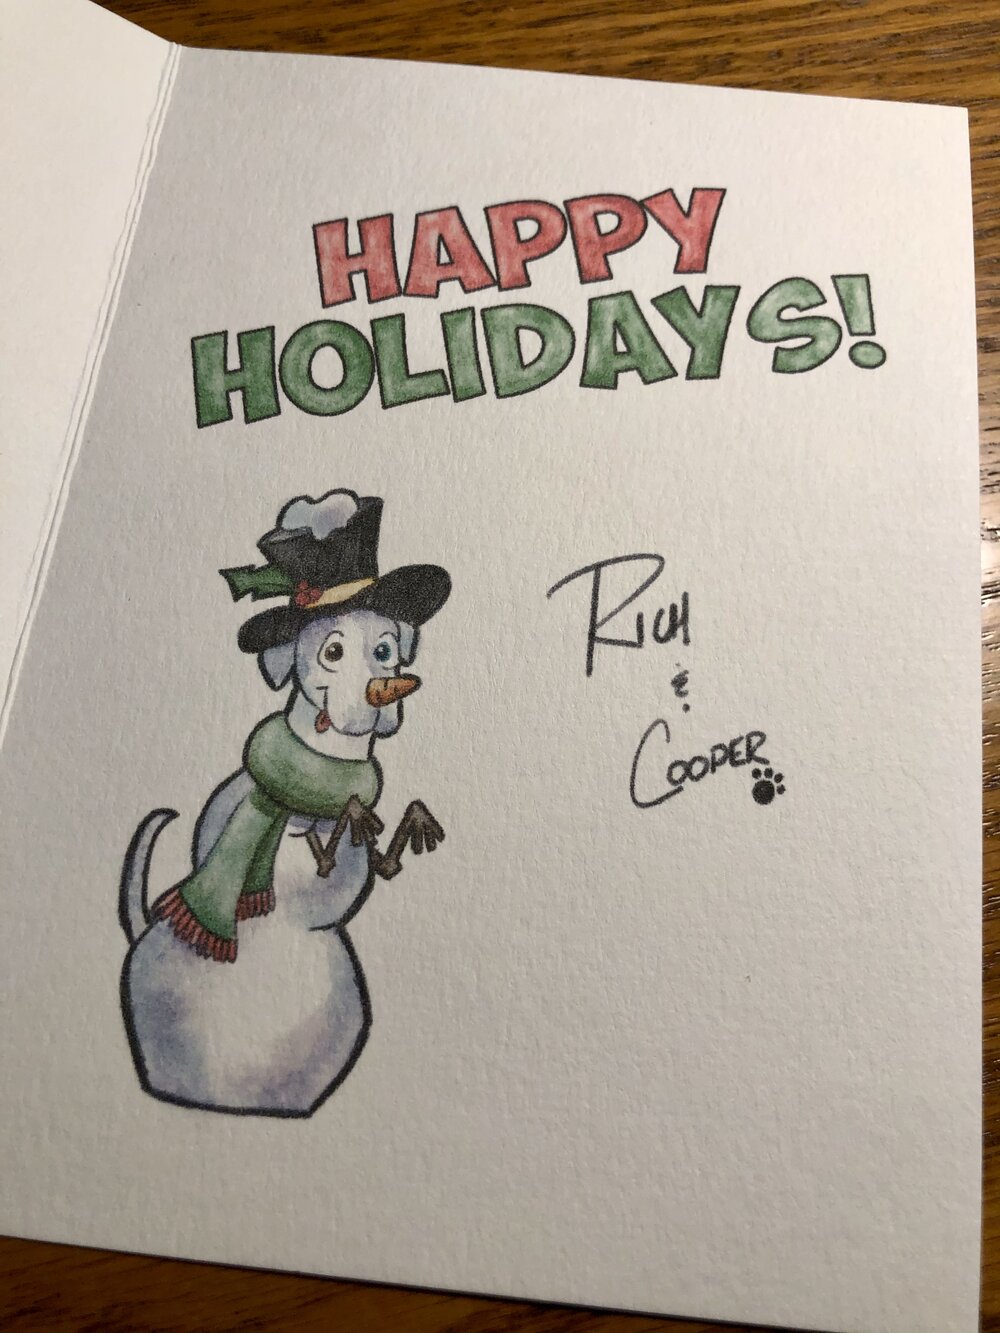 Inside of Holiday Card